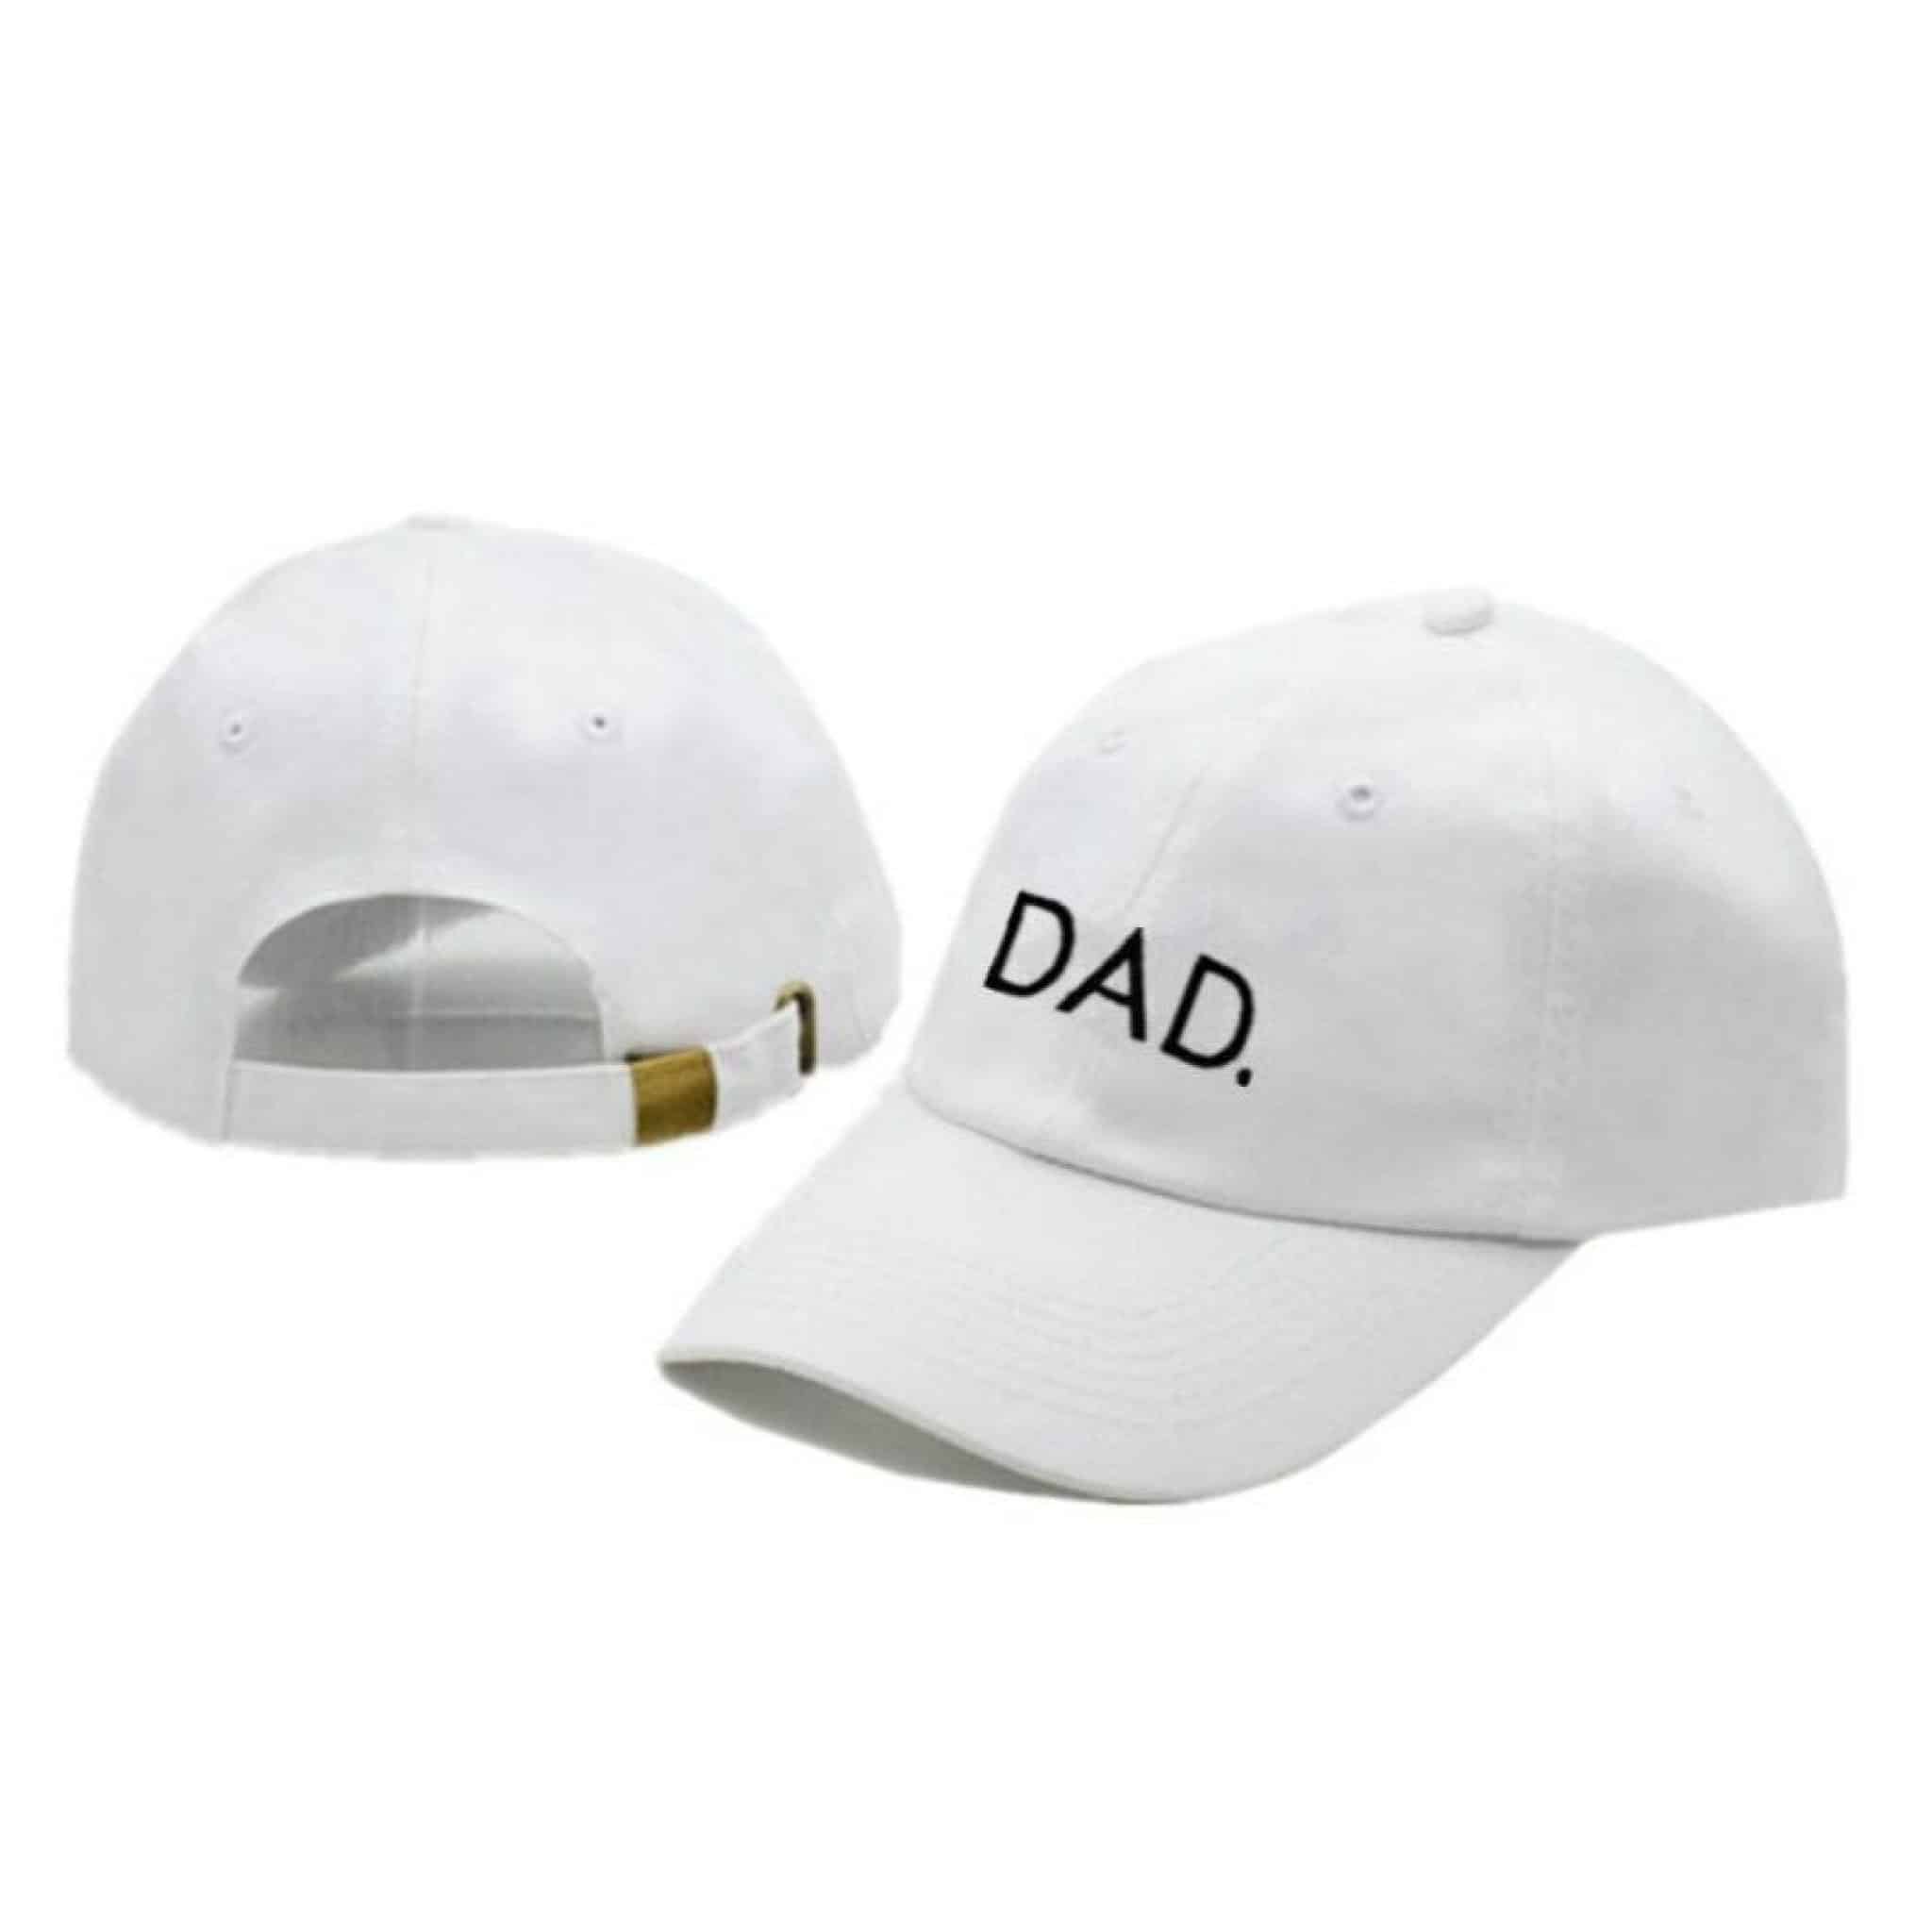 Collection 92+ Background Images That Hat Is For Dad In Spanish Excellent